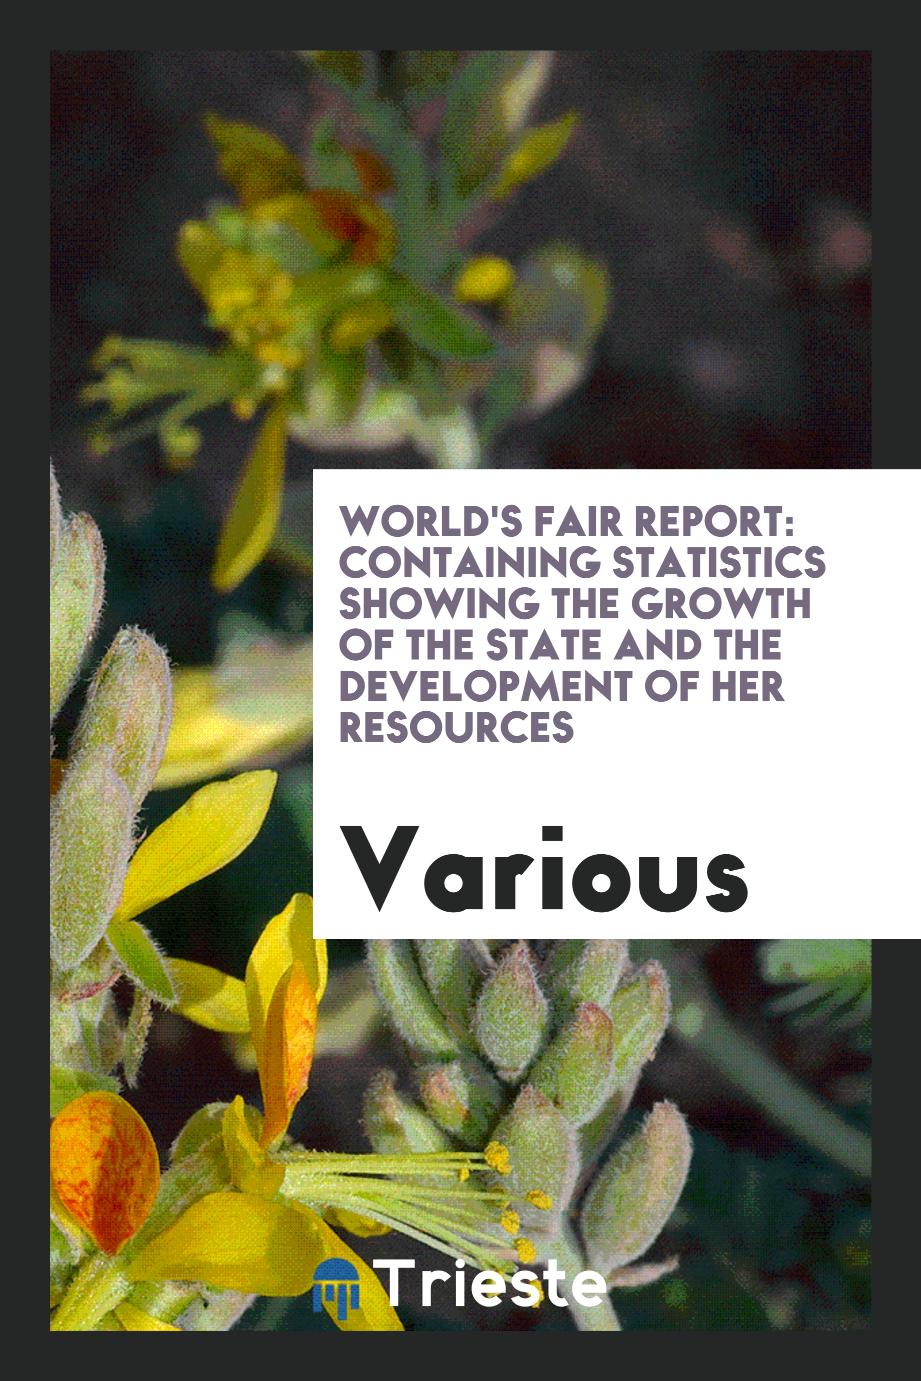 World's Fair Report: Containing Statistics Showing the Growth of the State and the development of her resources